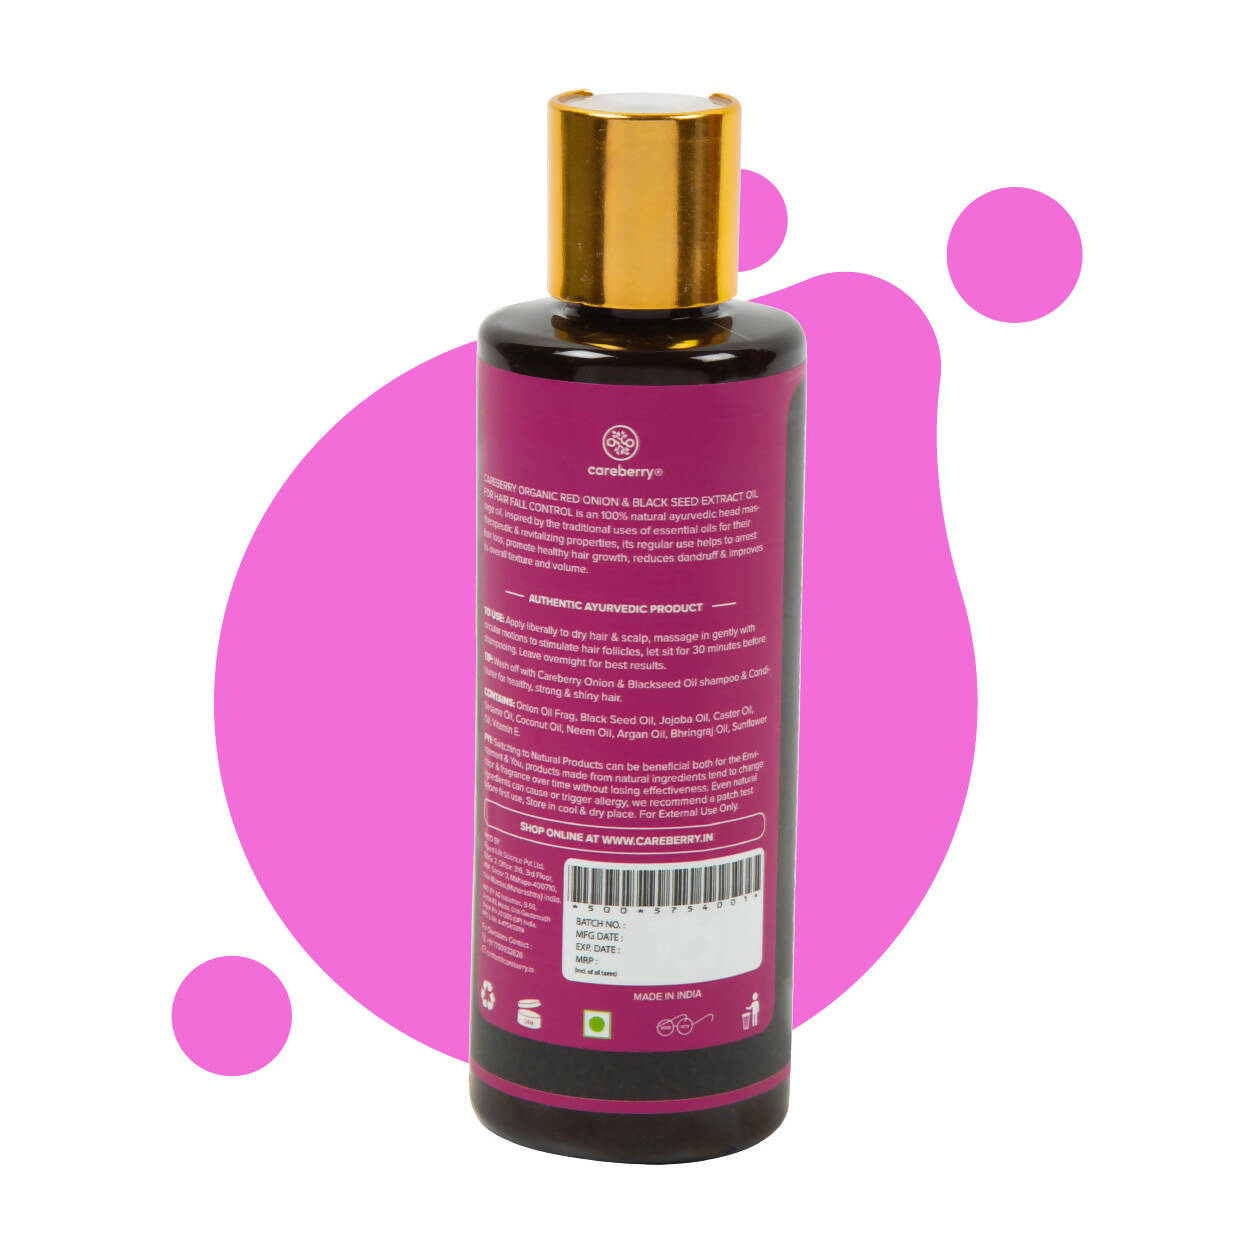 Careberry Organic Red Onion & Black Seed Extract Oil For Anti Hair Fall